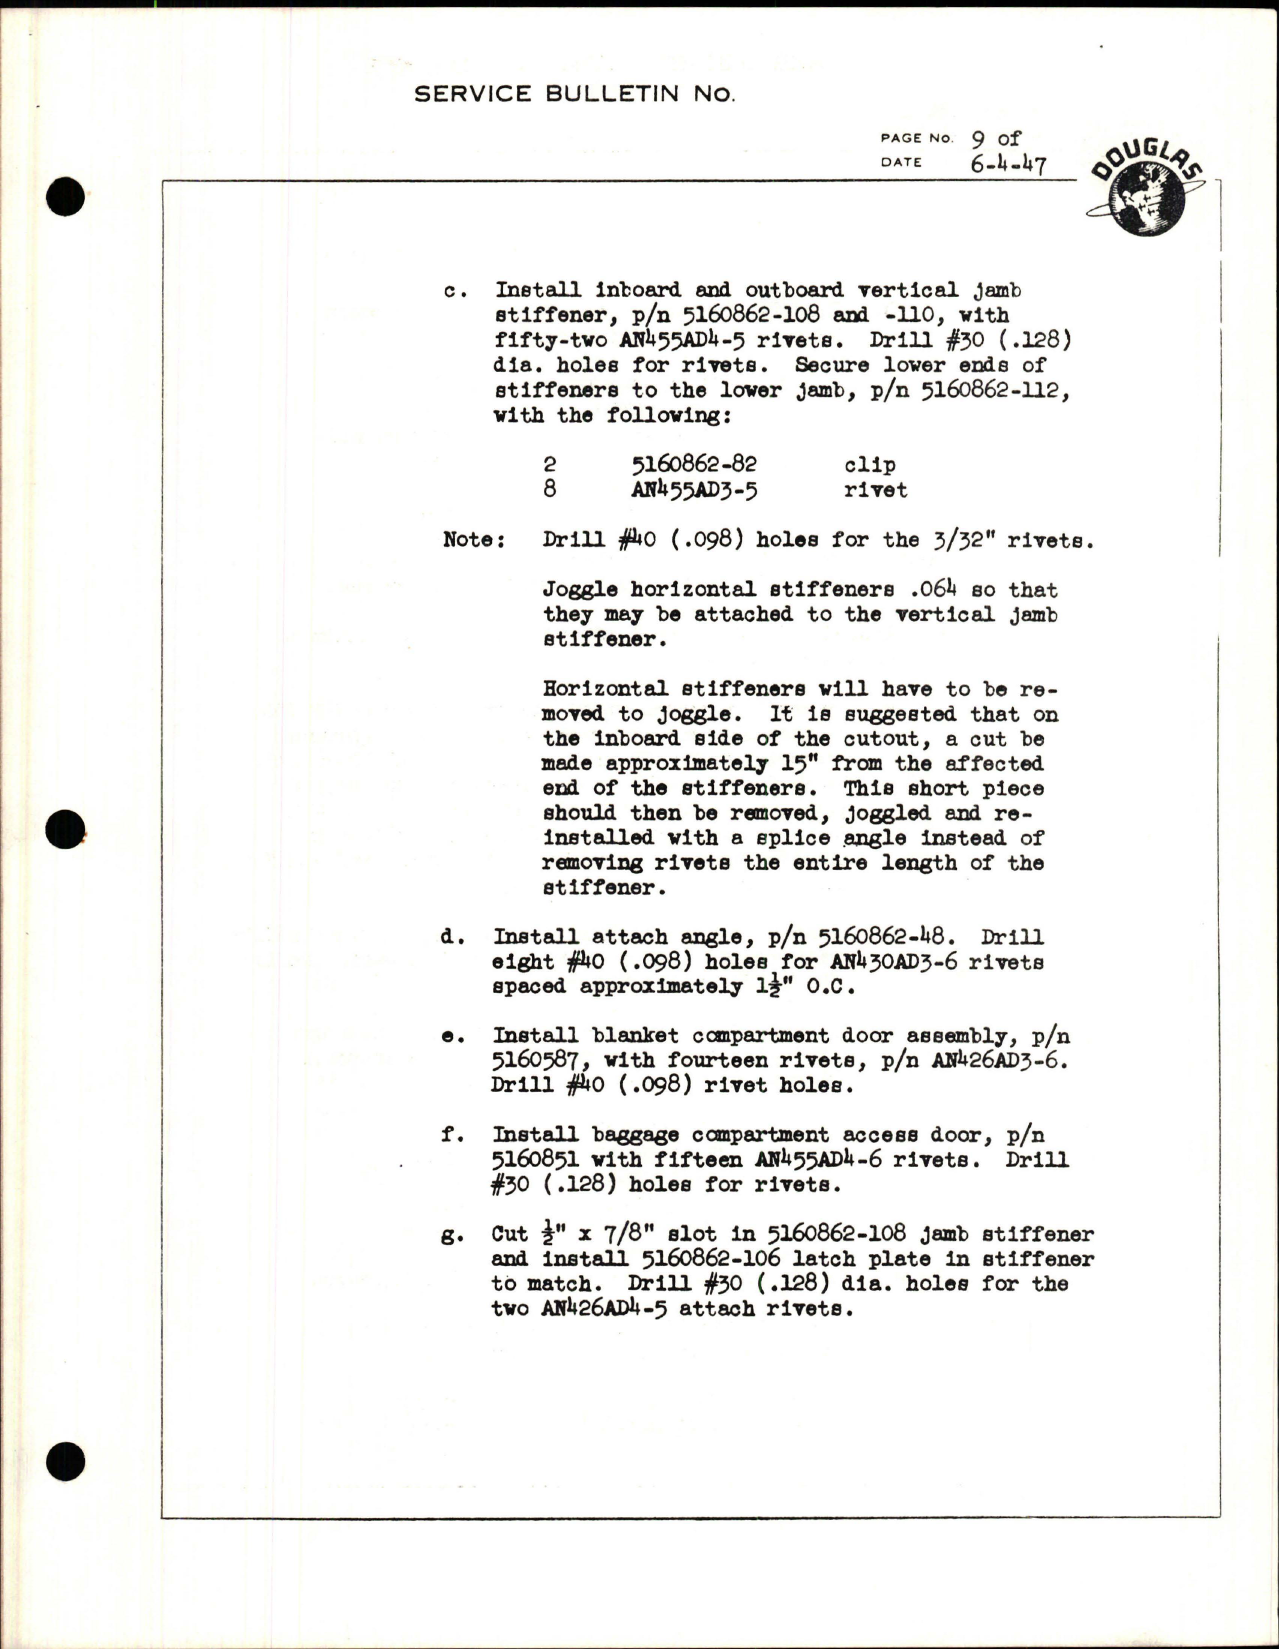 Sample page 9 from AirCorps Library document: Rear Baggage Compartment Access Door Vent